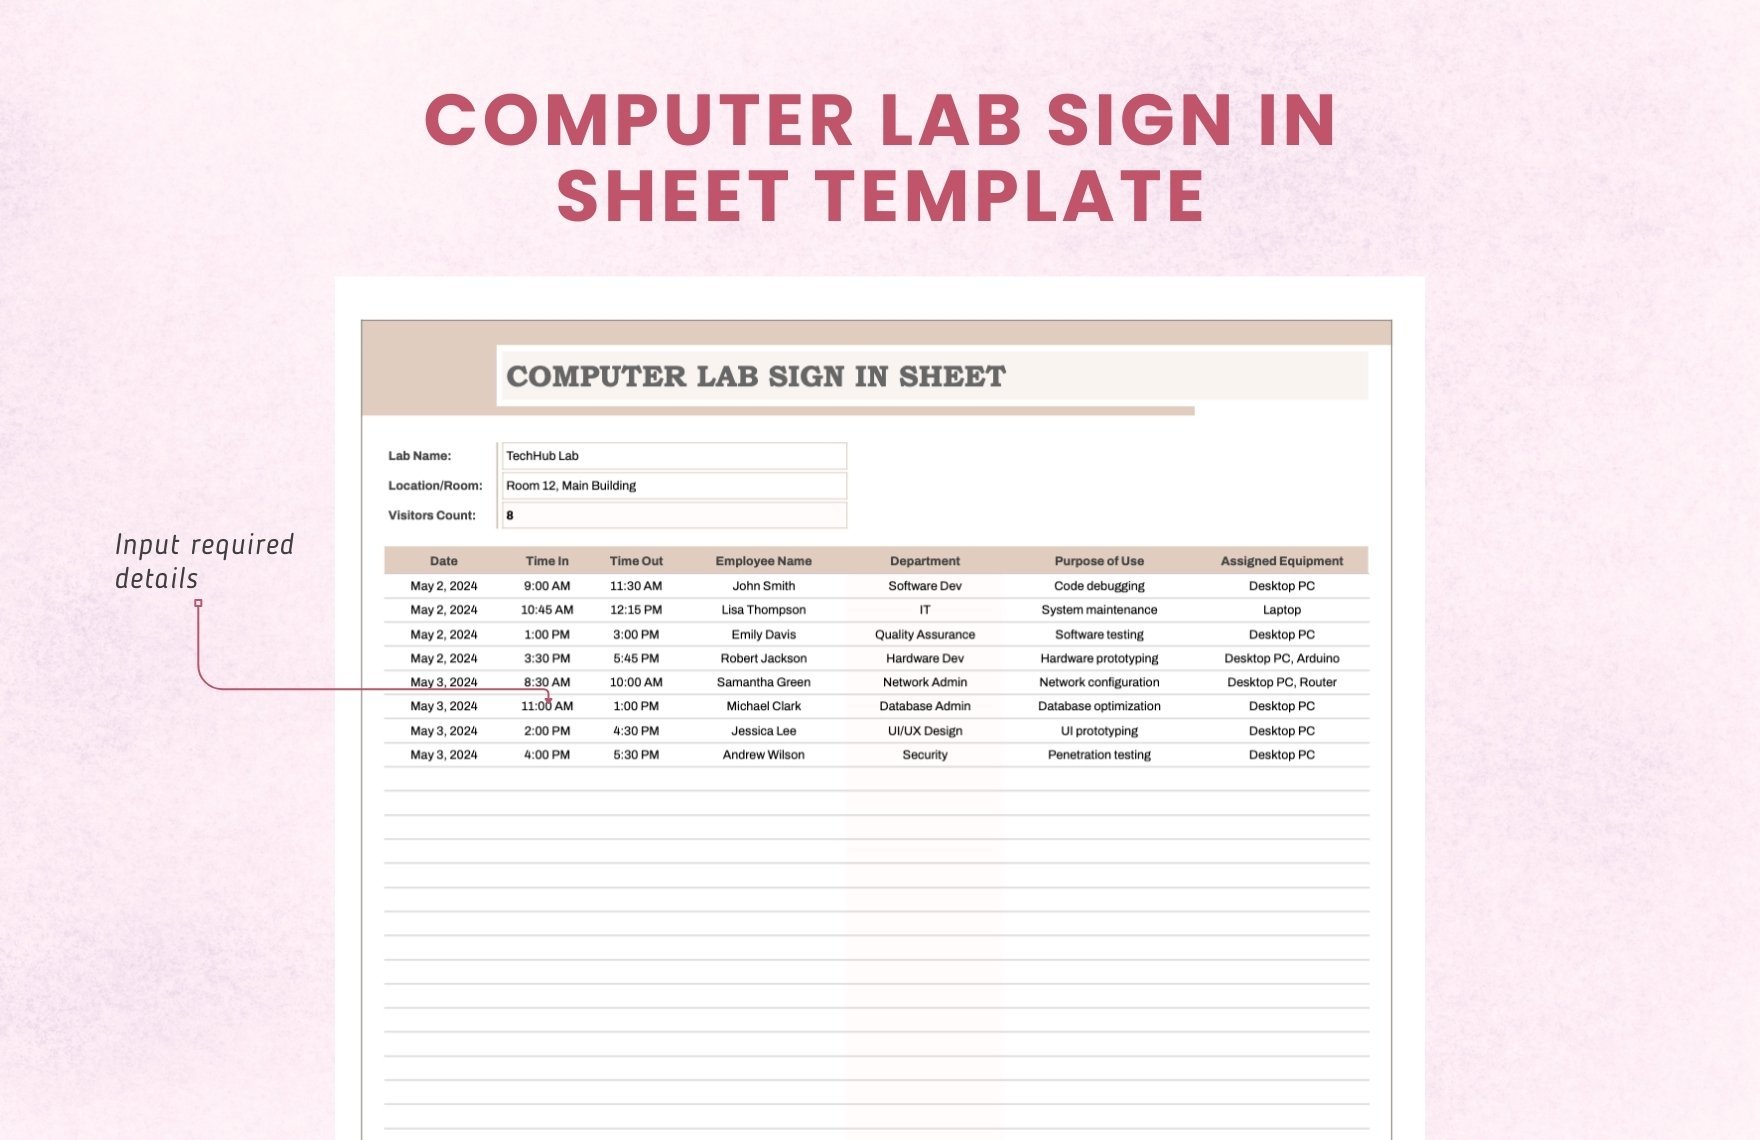 Computer Lab Sign in Sheet Template